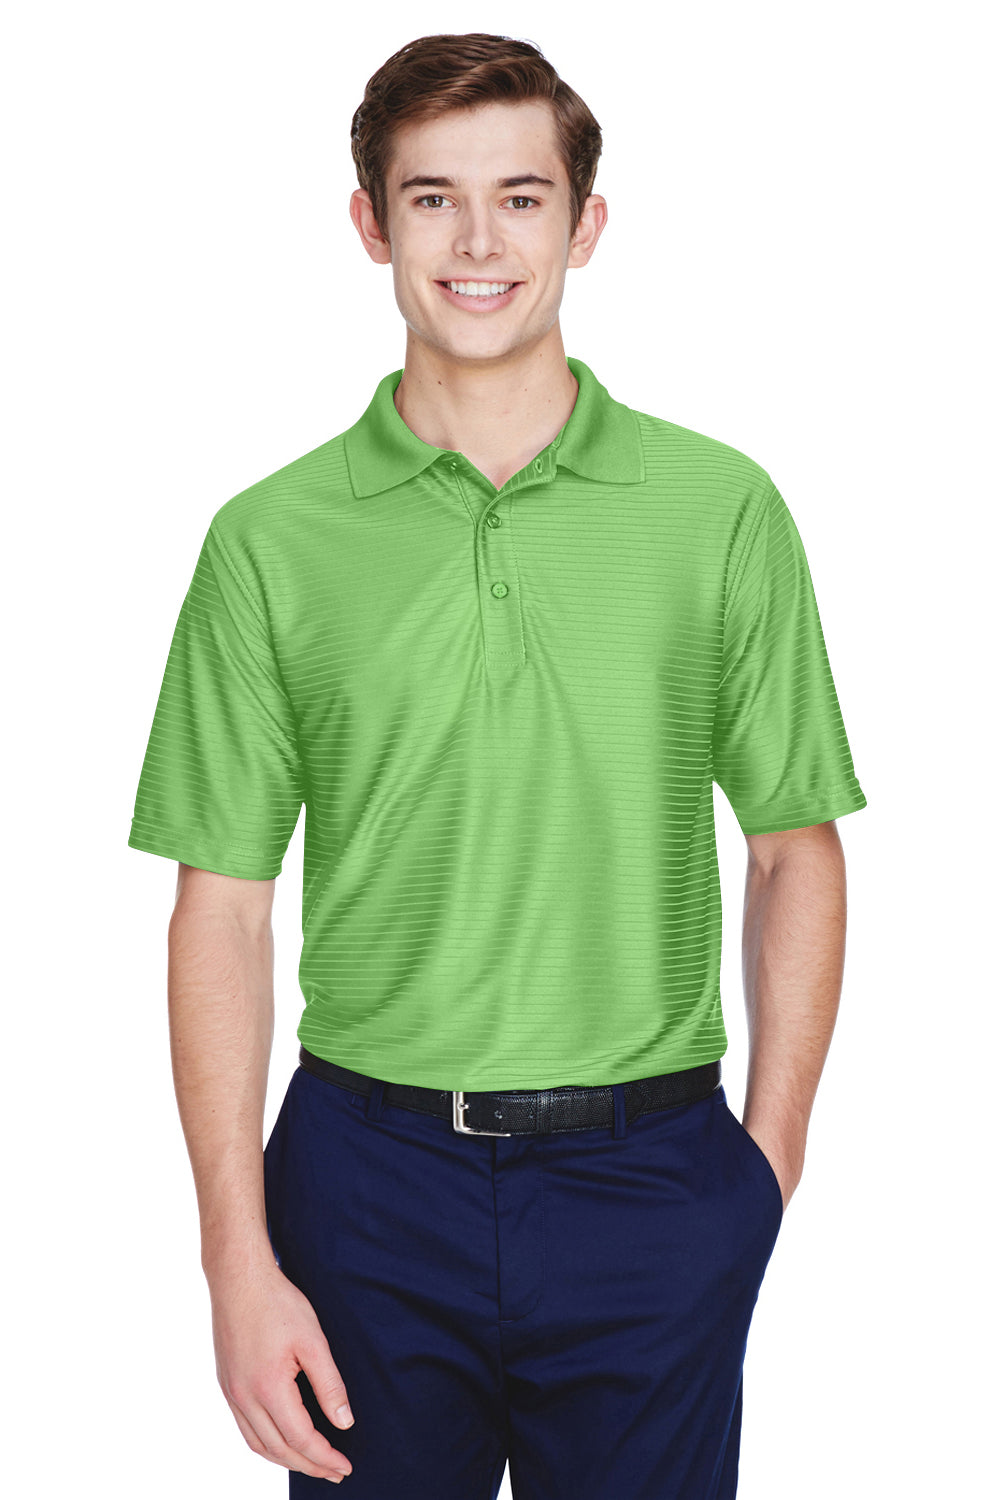 UltraClub 8413 Mens Cool & Dry Elite Performance Moisture Wicking Short Sleeve Polo Shirt Apple Green Front